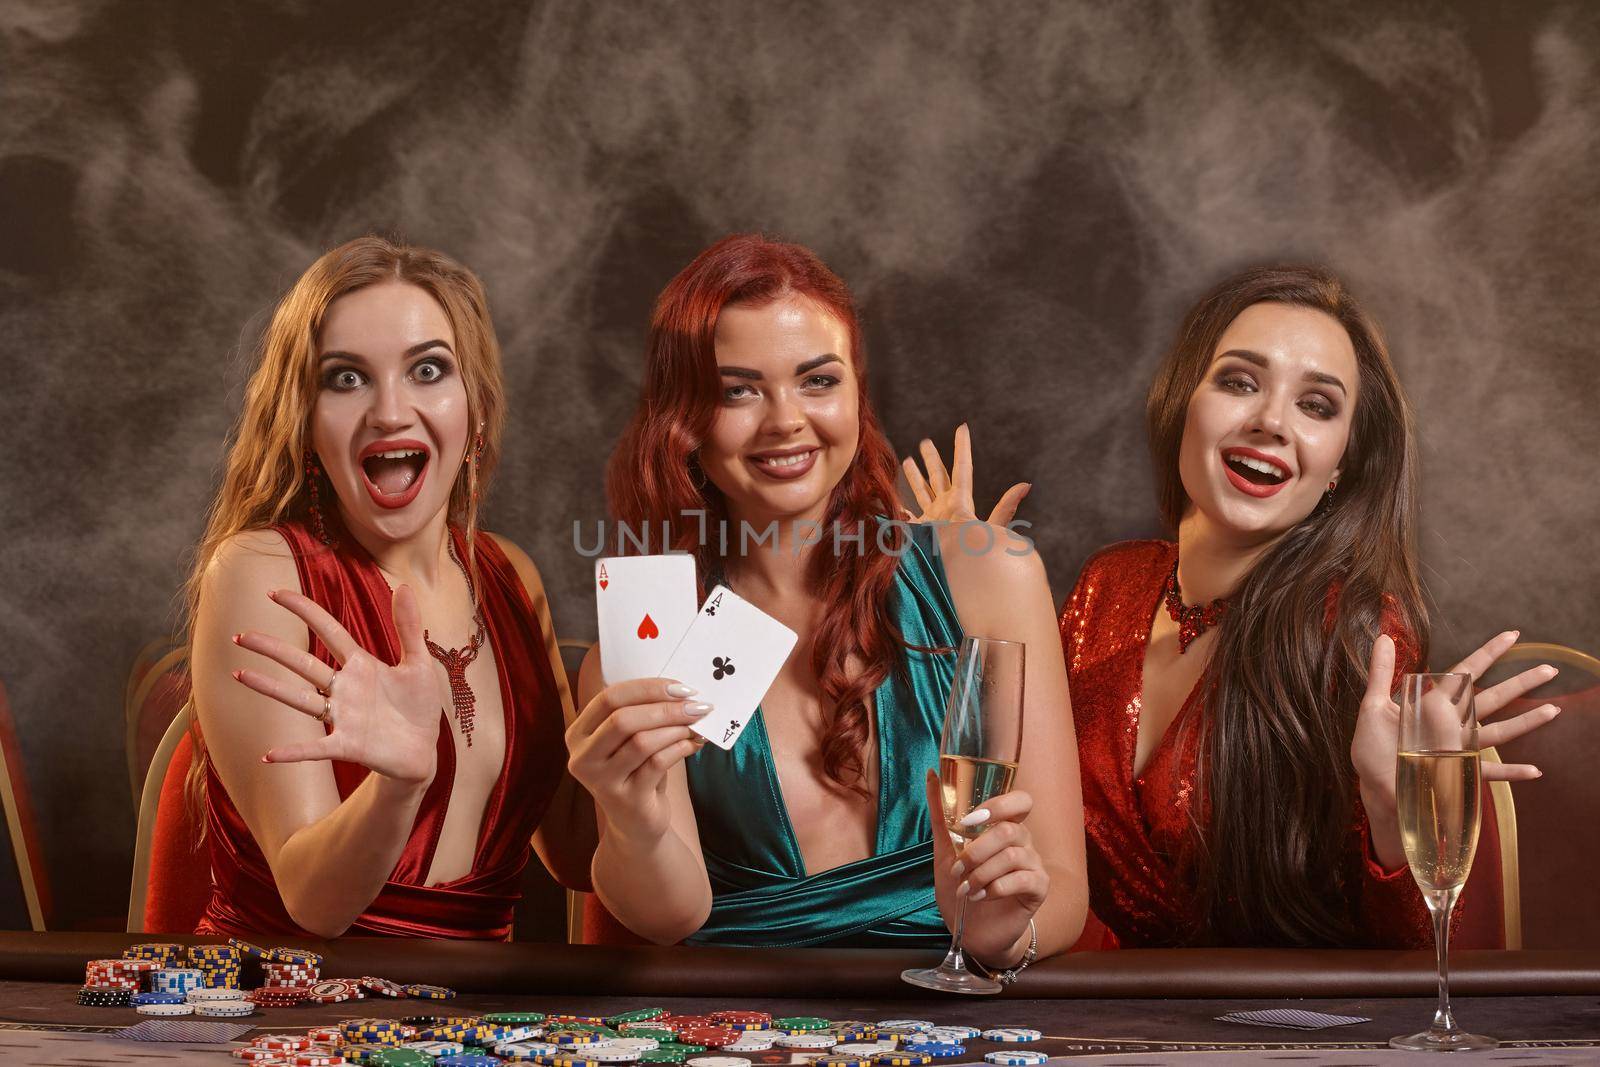 Sexy women are playing poker at casino. They are celebrating their win, smiling, looking at the camera and posing at the table against a a dark smoke background. Cards, chips, money, alcohol, gambling, entertainment concept.